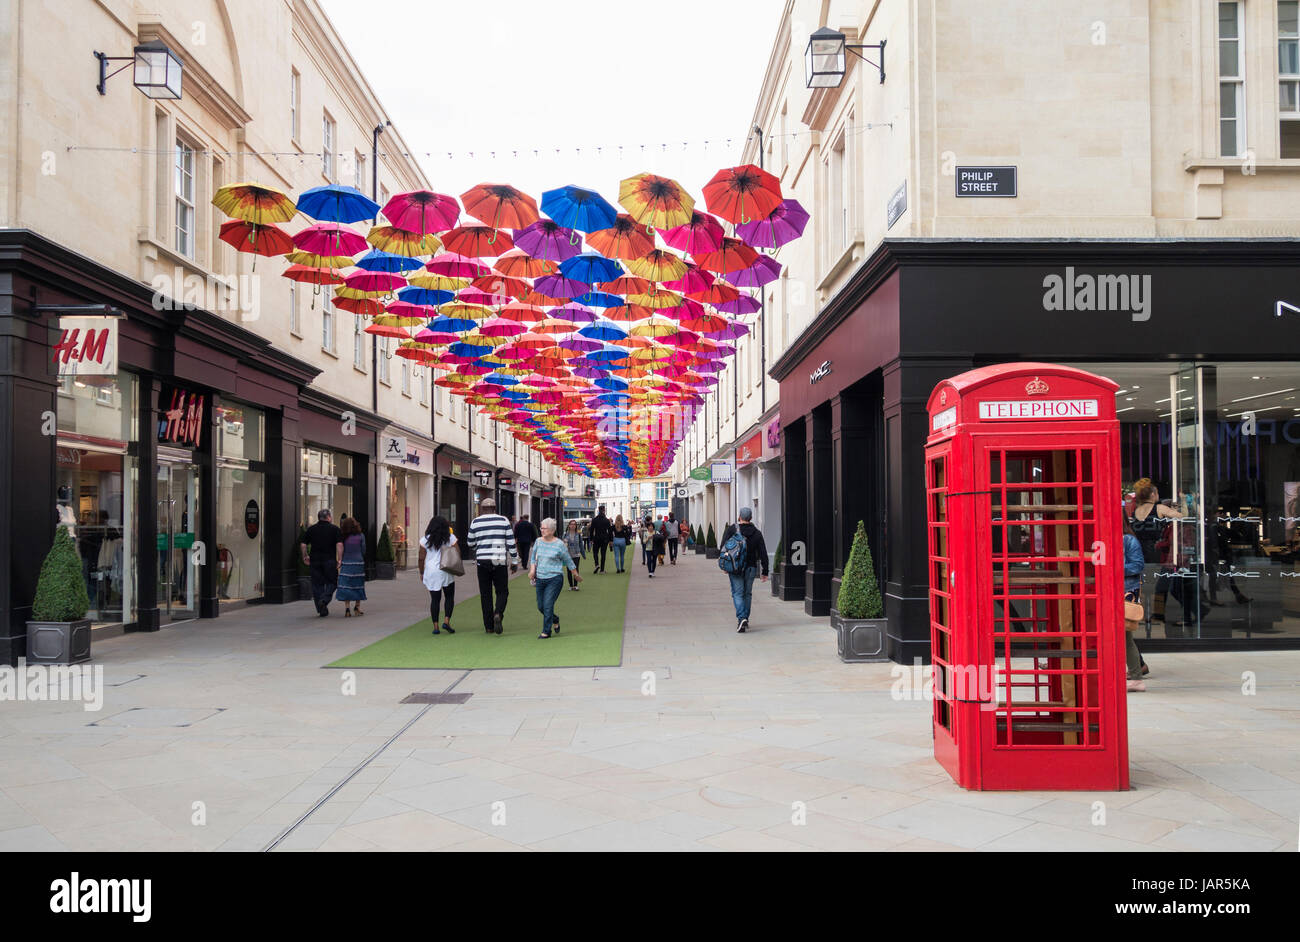 Umbrellas suspended in the air above shoppers in Southgate Shopping Centre, Bath, England, UK Stock Photo